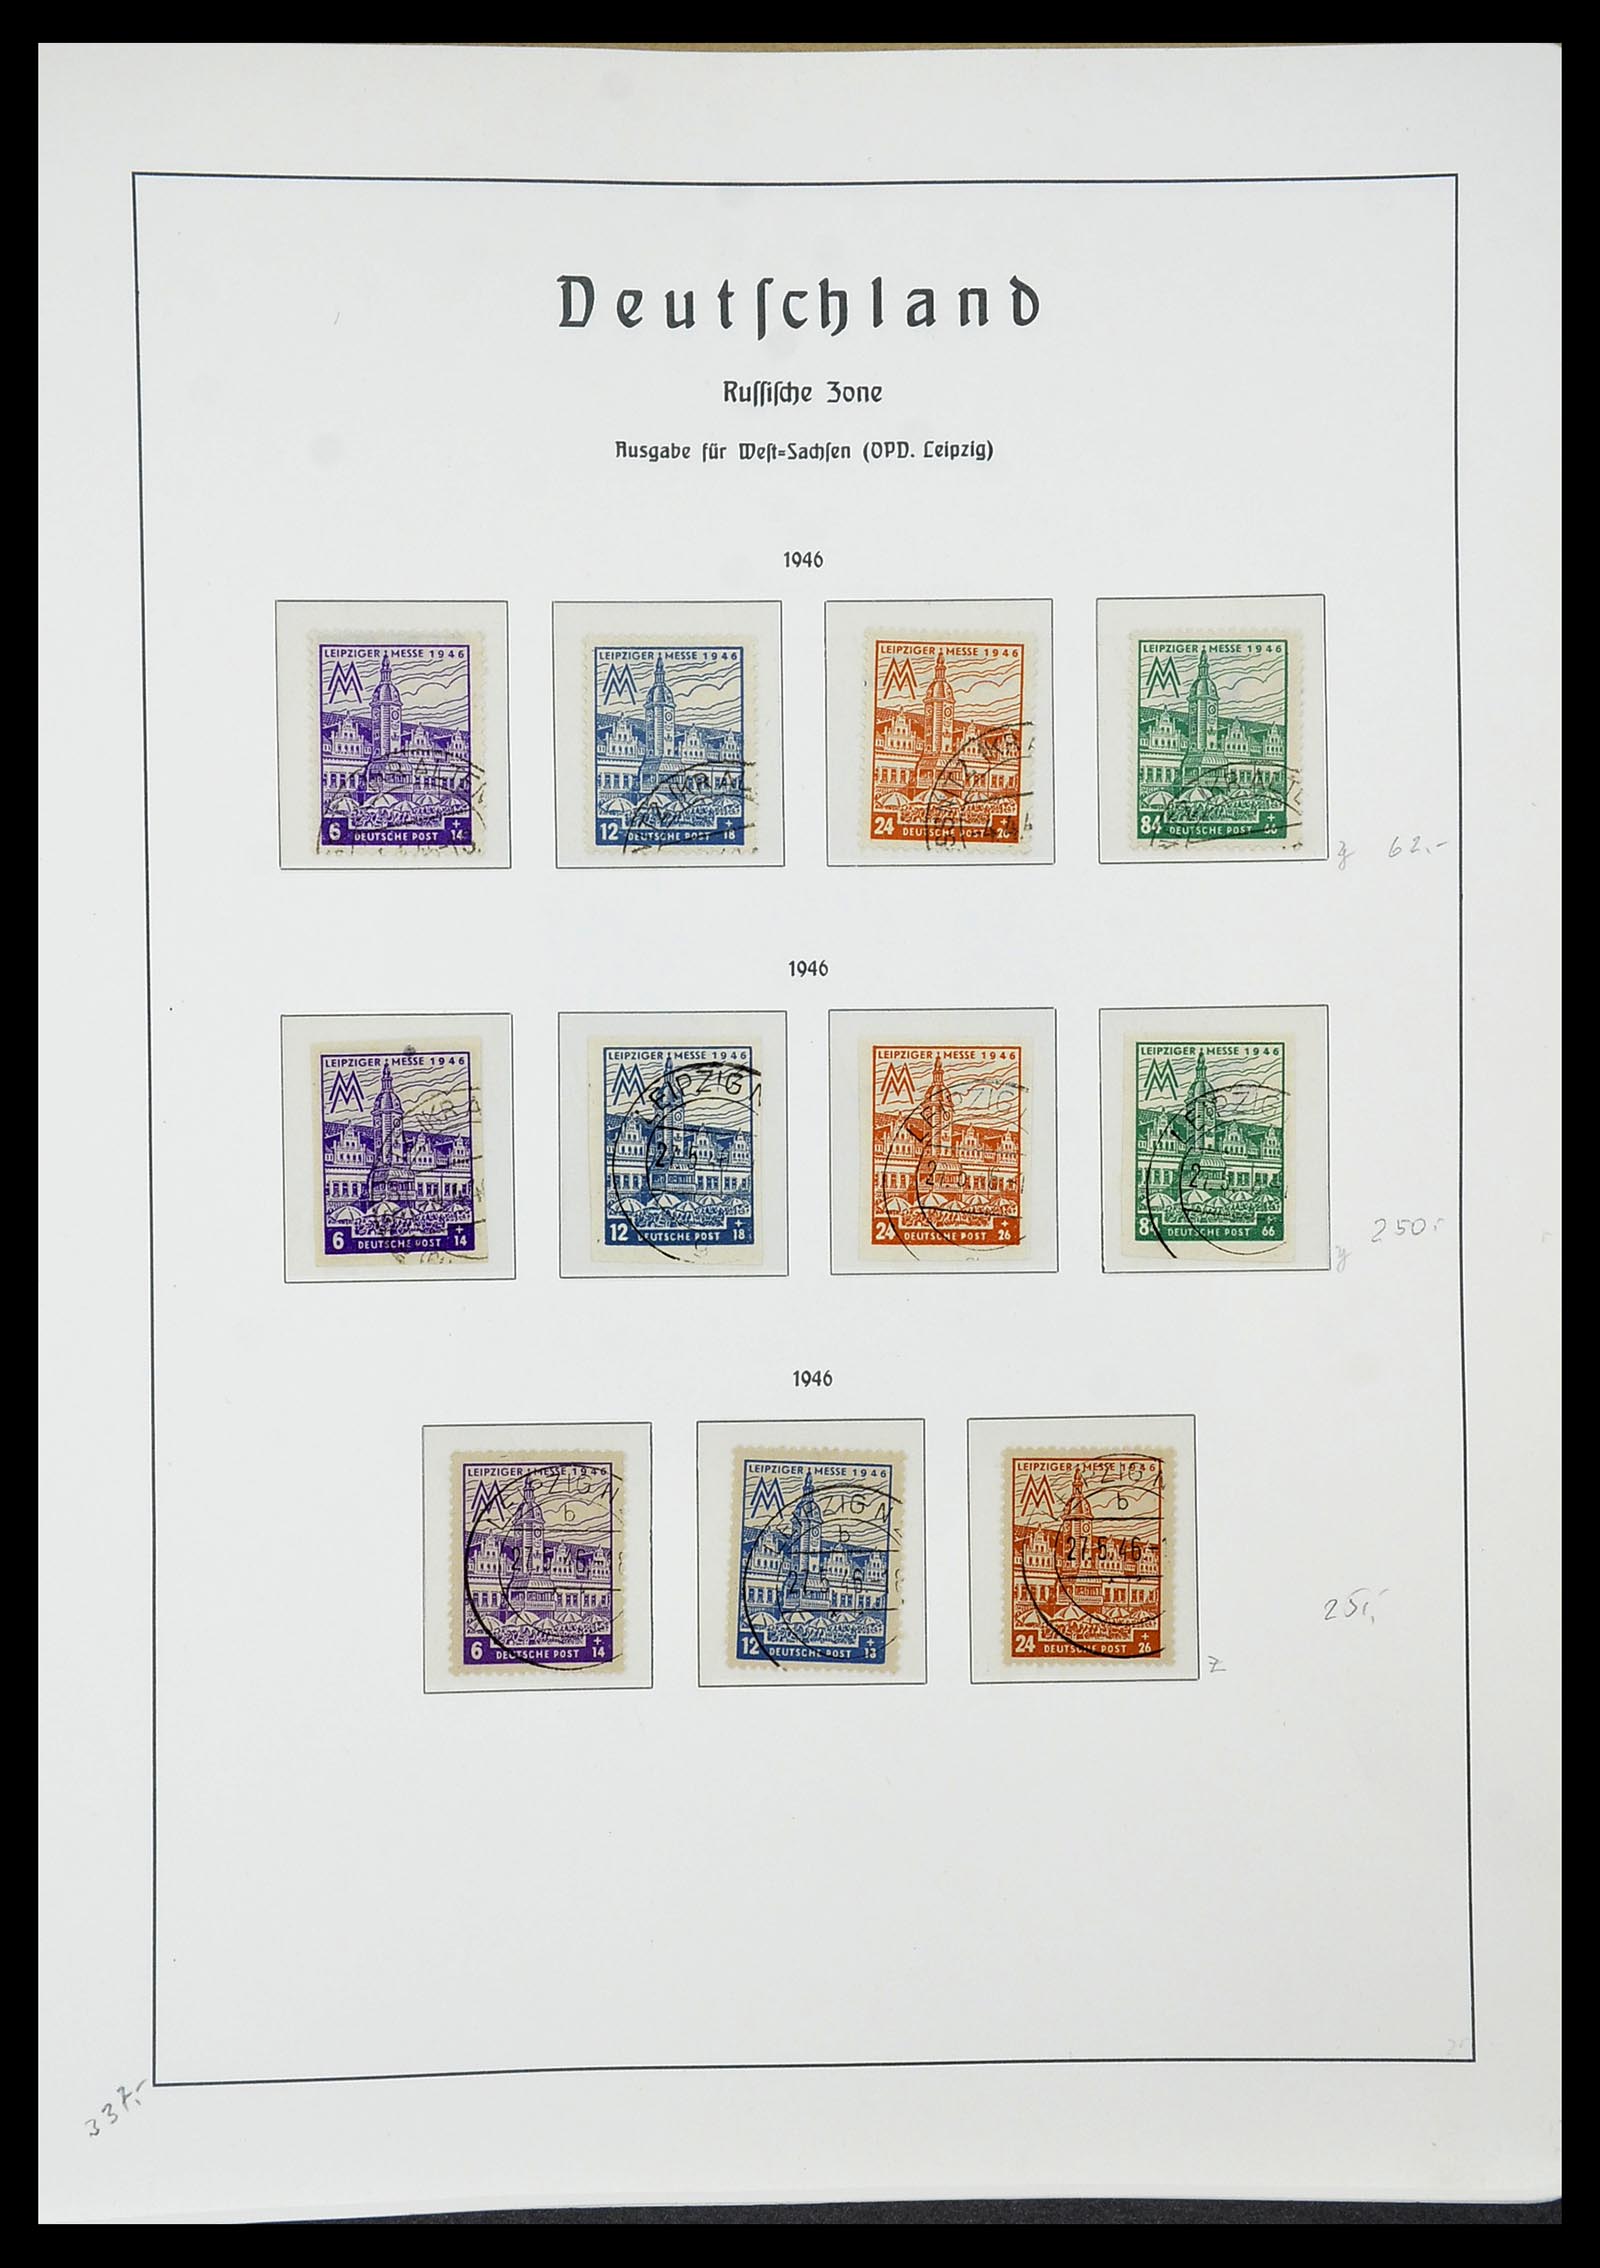 34185 062 - Stamp collection 34185 German territories, zones, occupations 1920-1959.